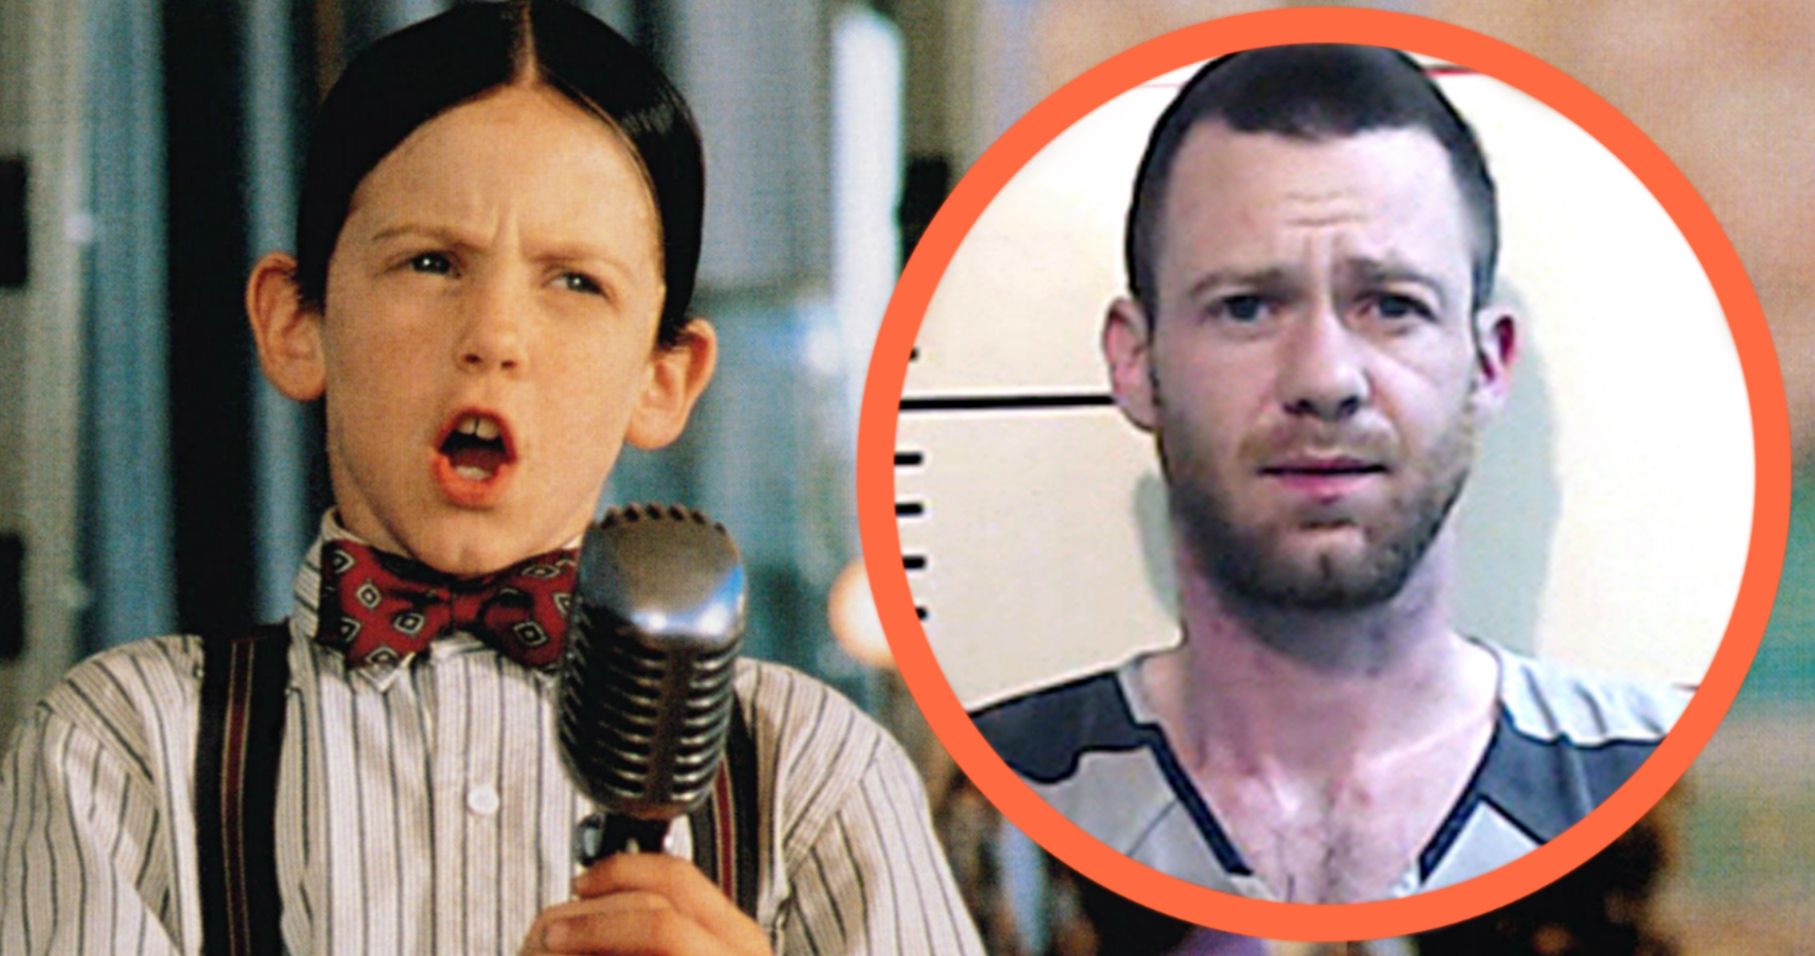 Alfalfa Actor from The Little Rascals Movie Arrested for Huffing Air Duster